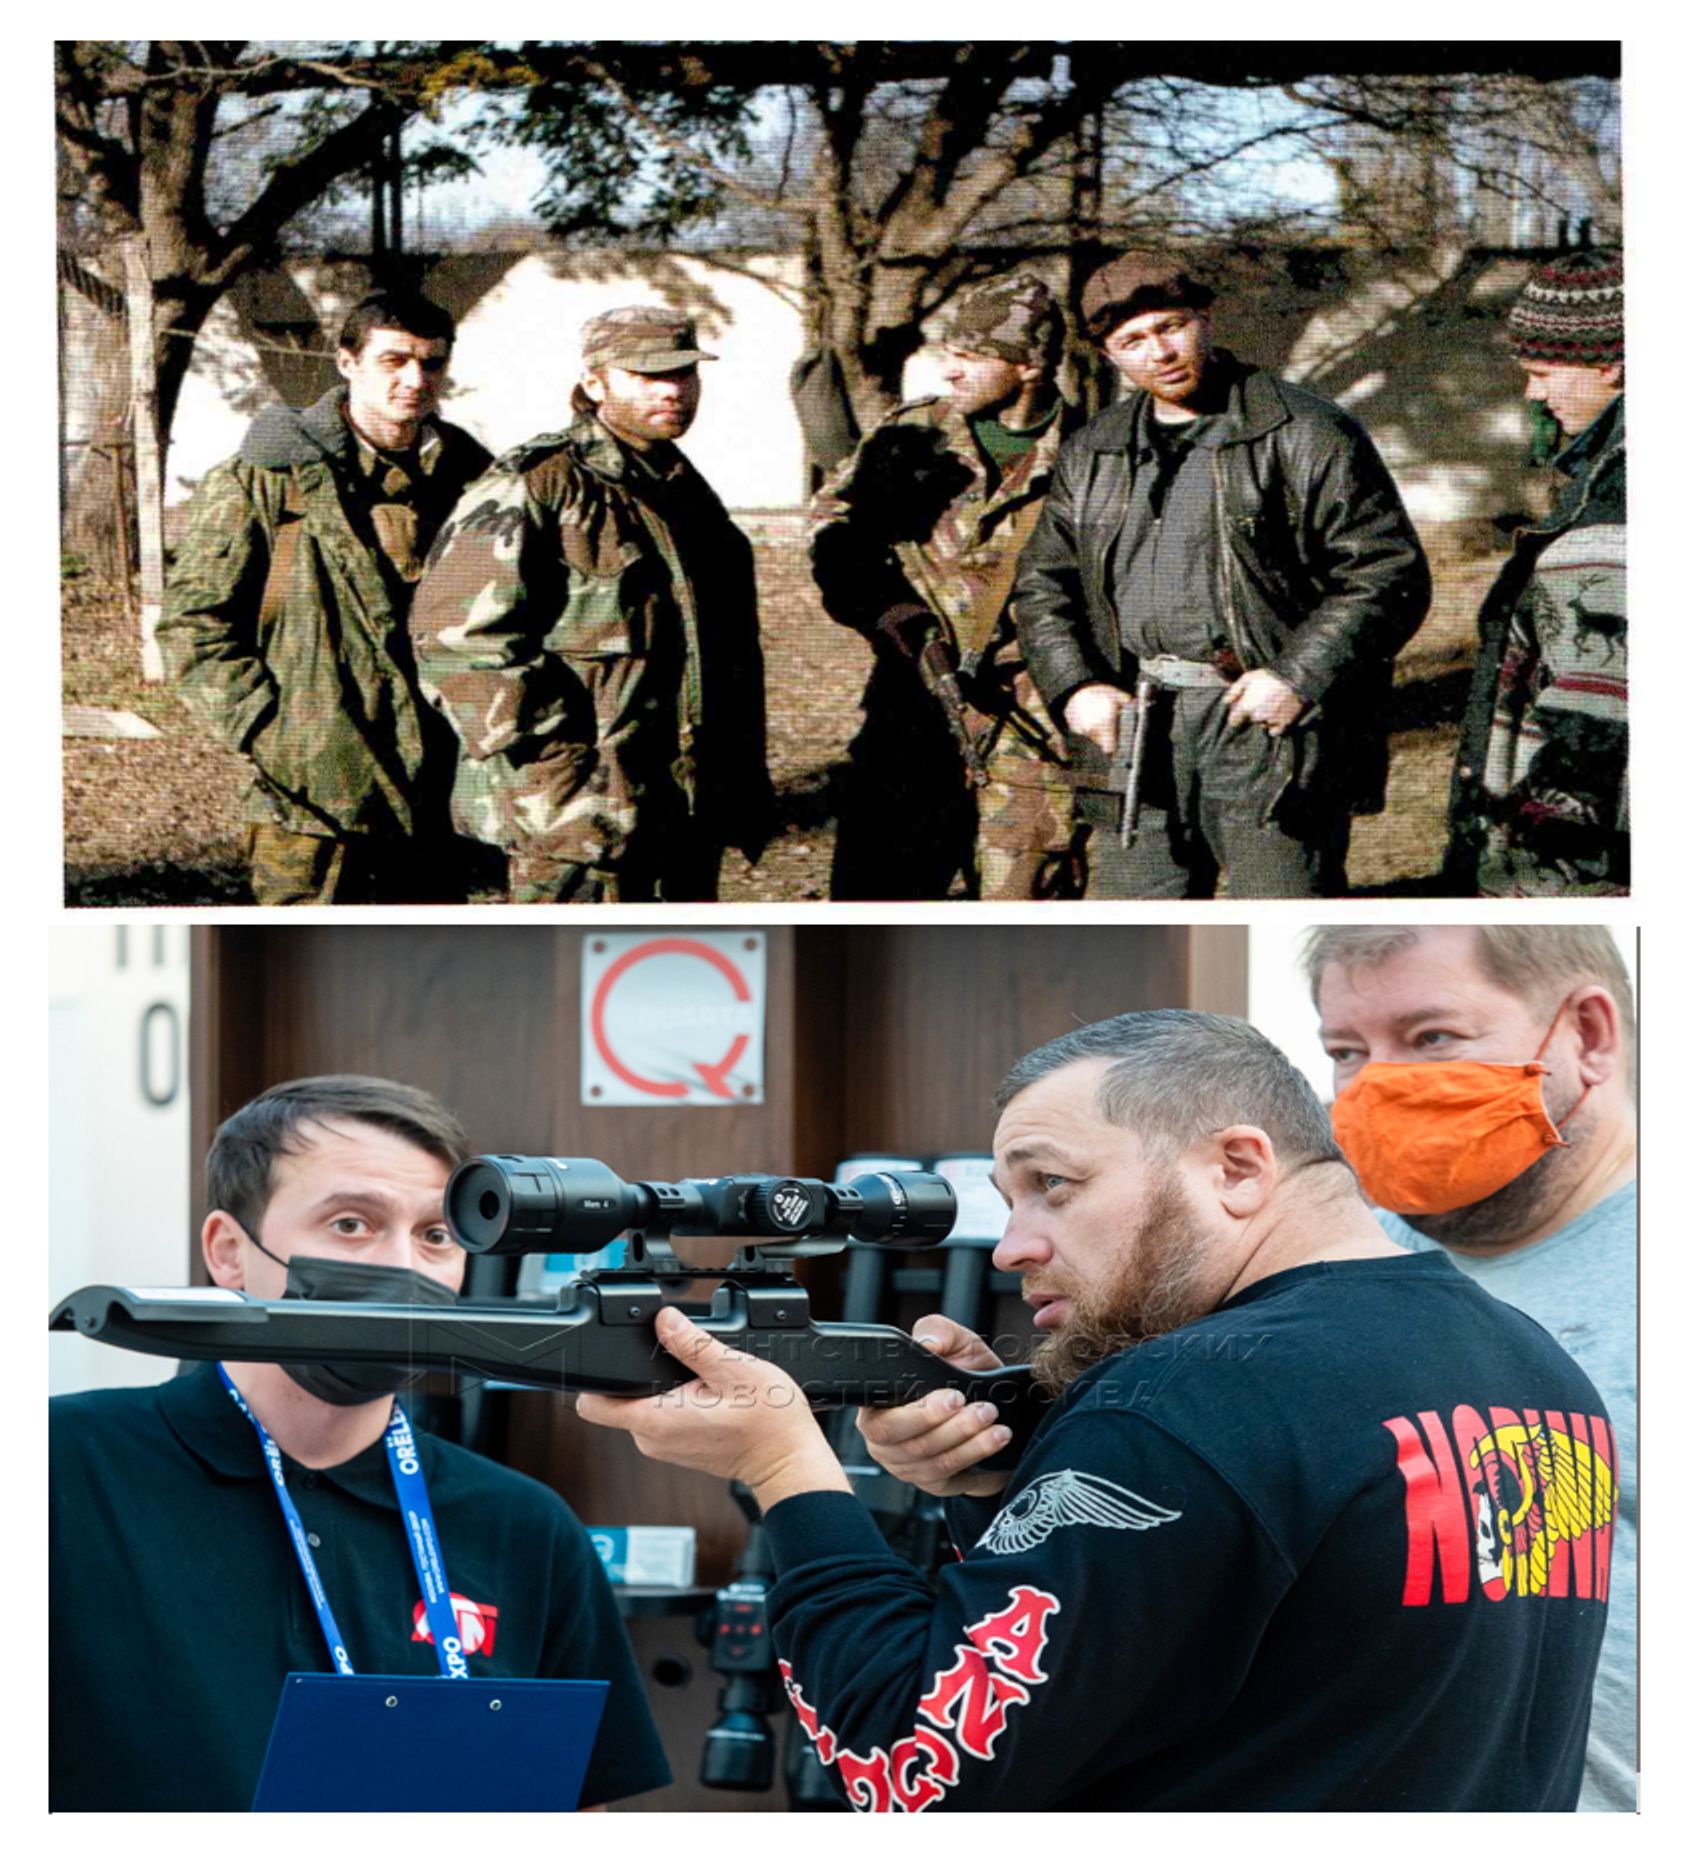 Karaziy (second from right) in Chechnya circa 1996, and more recently at a gun show in Moscow.